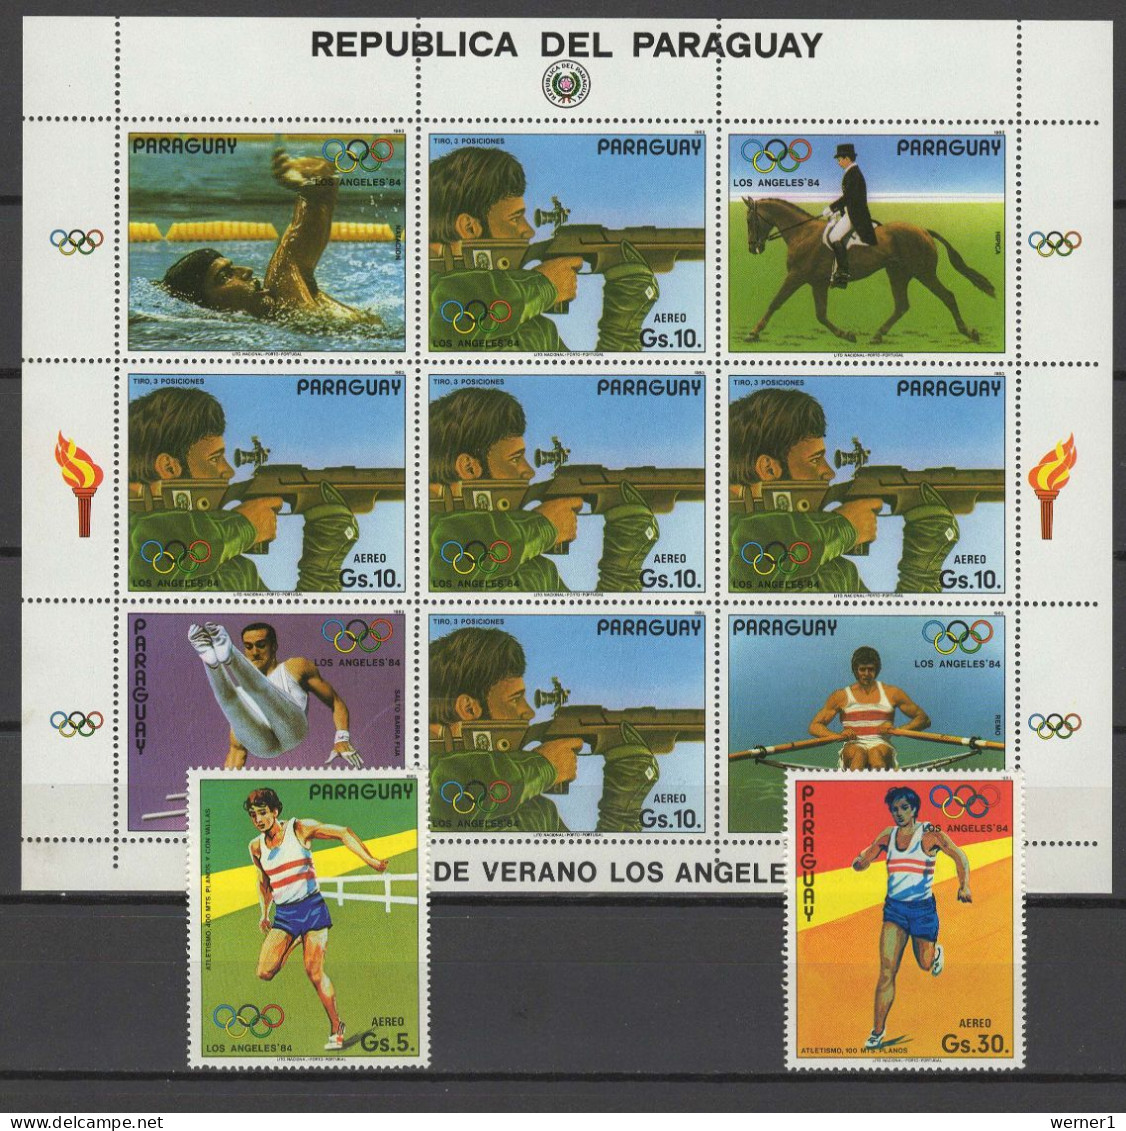 Paraguay 1984 Olympic Games Los Angeles, Shooting, Athletics, Swimming, Rowing Etc. Sheetlet + 2 Stamps MNH - Verano 1984: Los Angeles